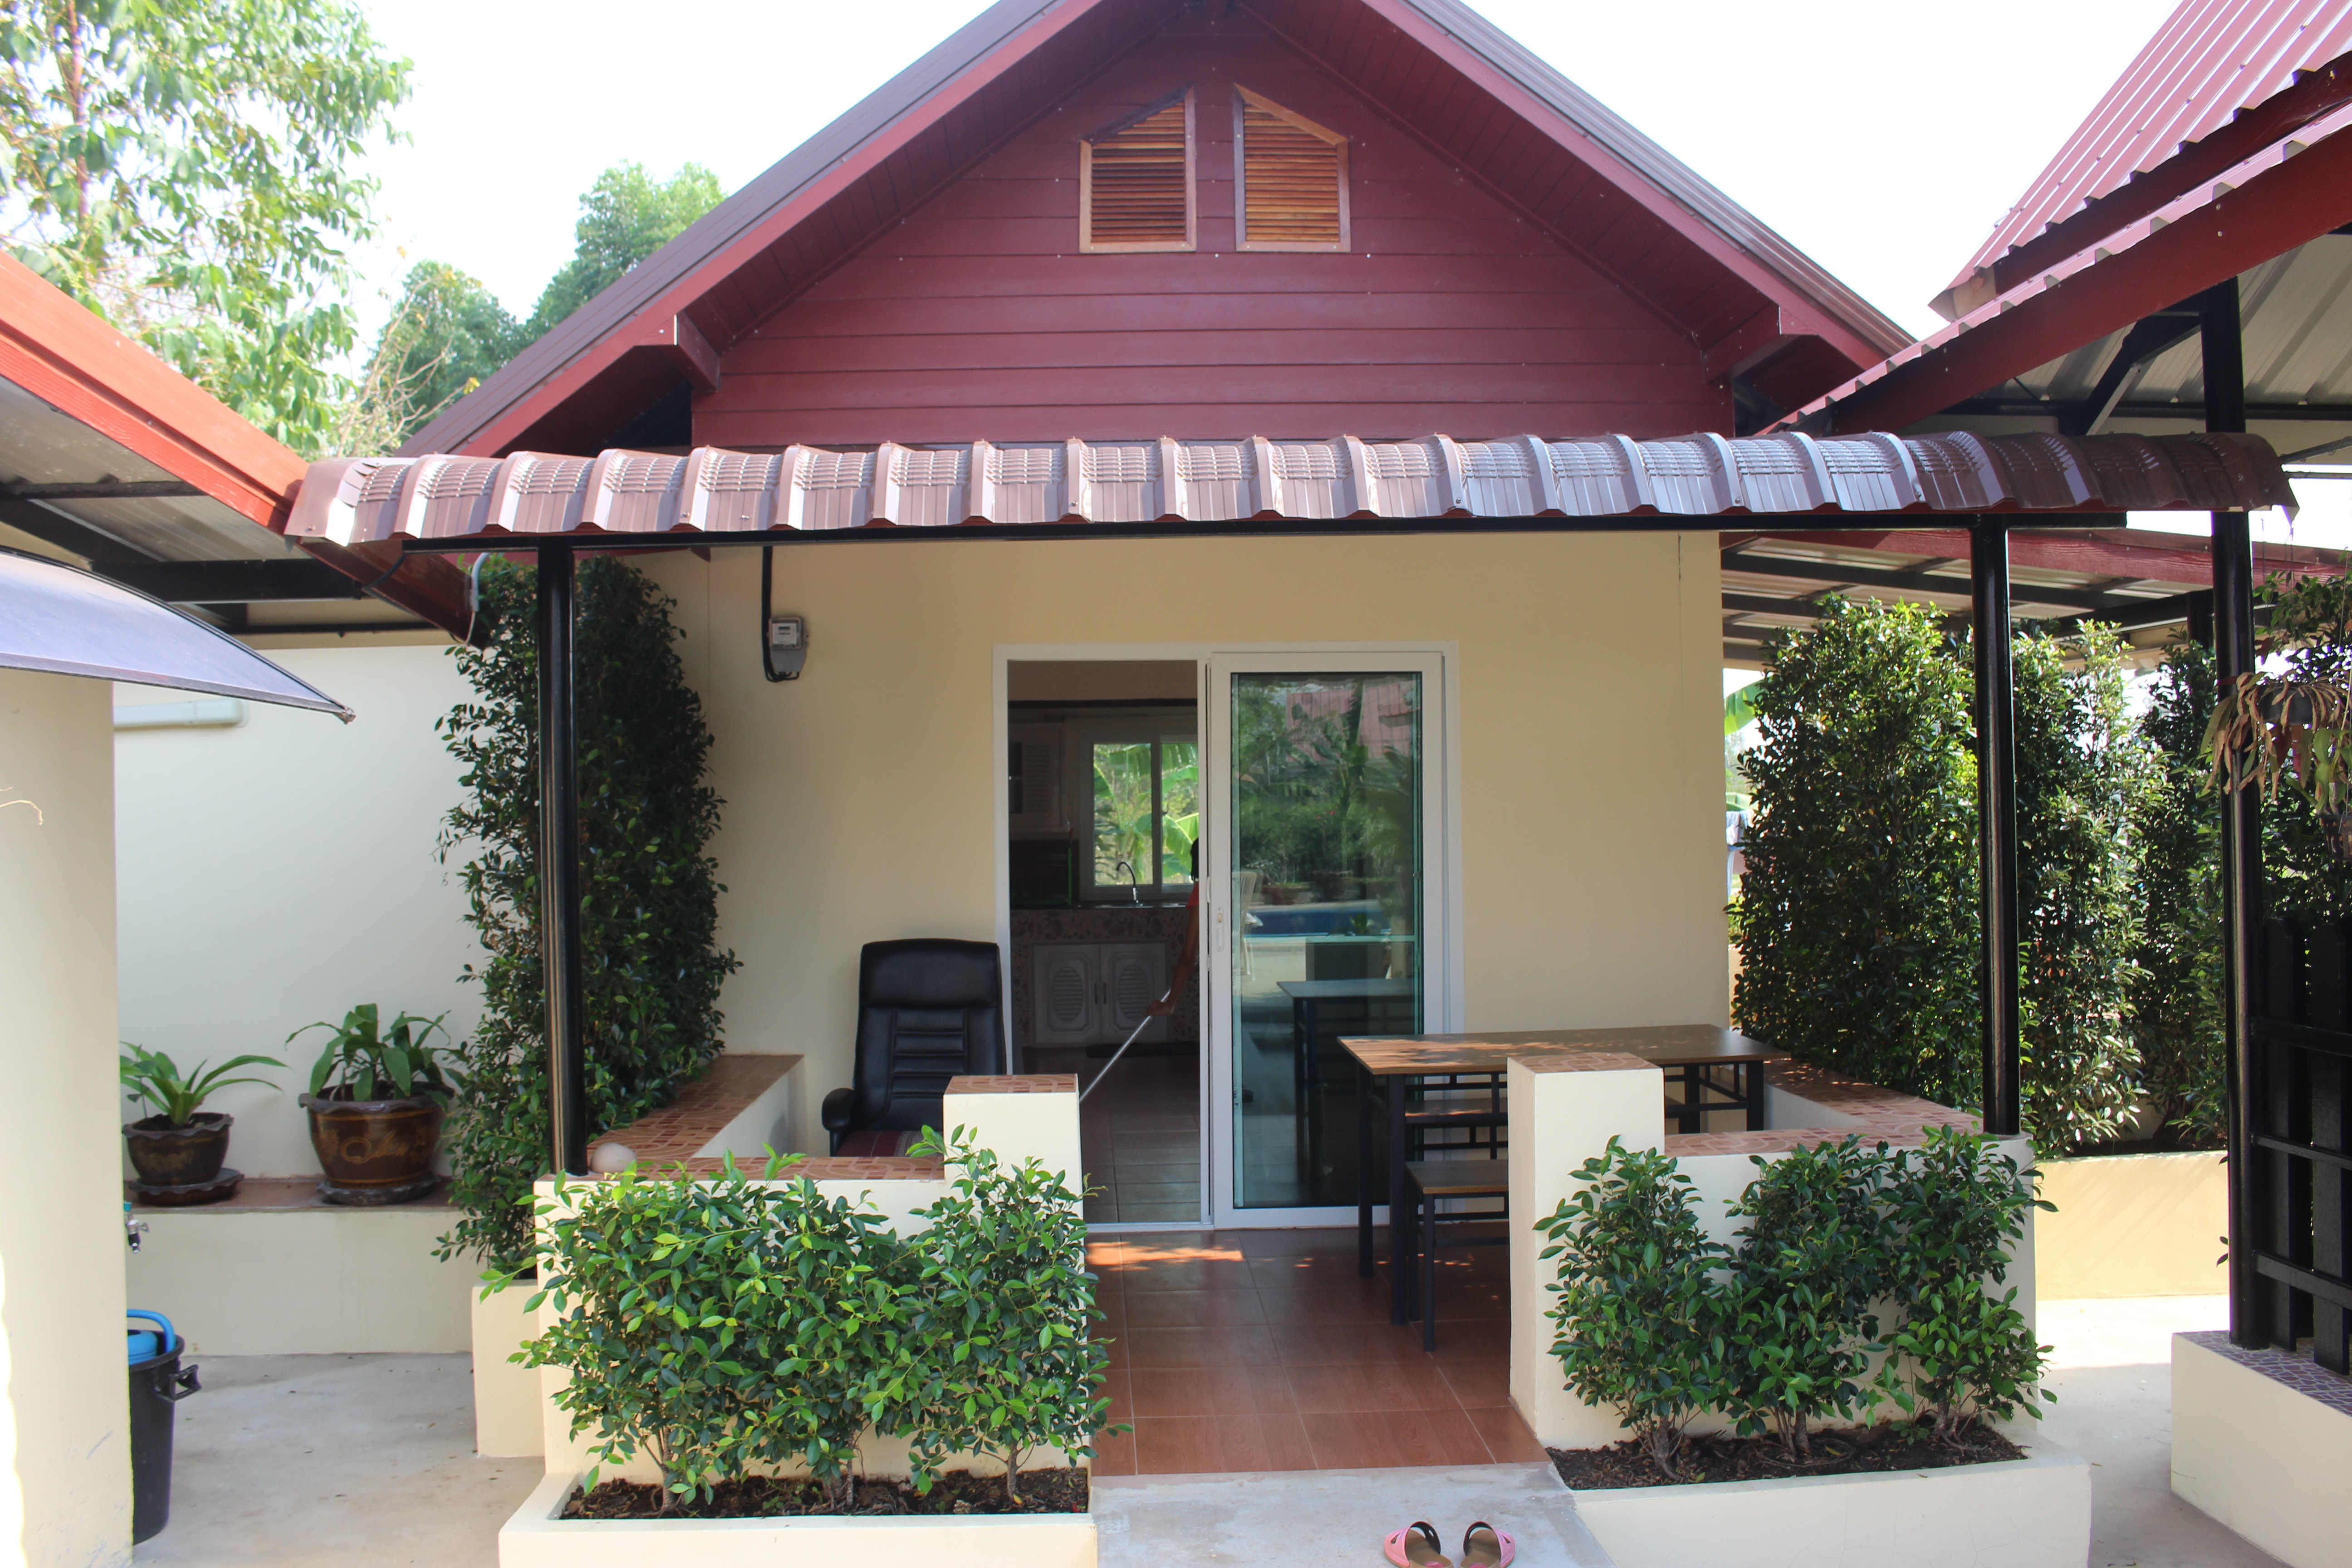 UdonThani pool villa Rentals 1,2,3 bedroom units  Prices from 699 baht per day.  www.leeyaresort.com